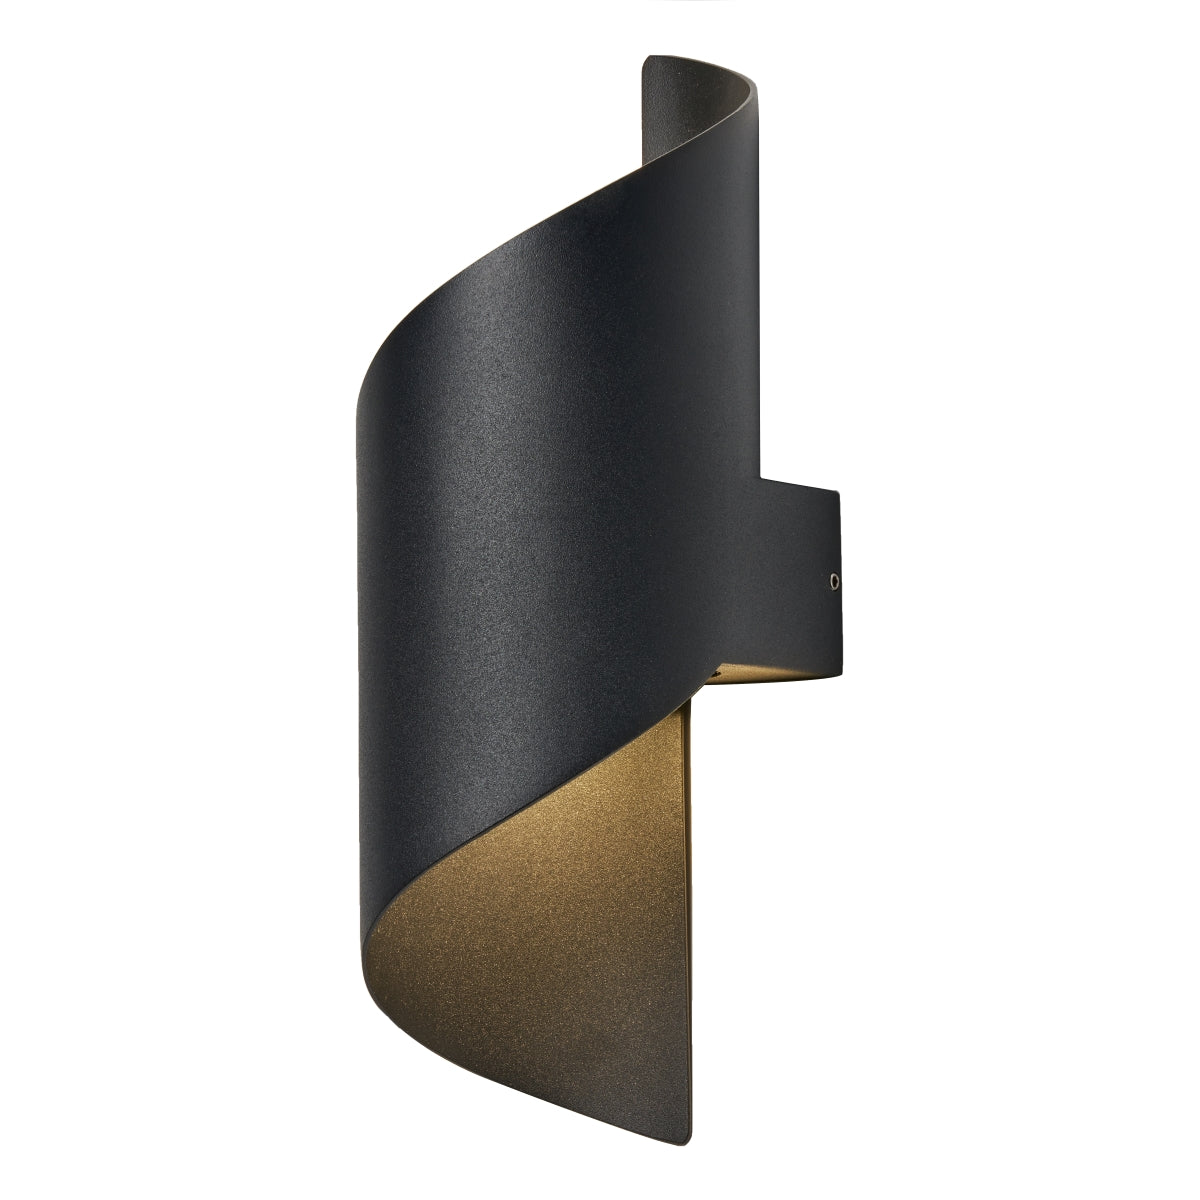 Our Felix black curved outdoor wall mounted LED outdoor light would look perfect in a modern or more traditional home design. Outside wall lights can provide atmospheric light in your garden, at the front door or on the terrace as well as a great security solution. It is designed for durability and longevity with its robust material producing a fully weatherproof and water resistant light fitting.